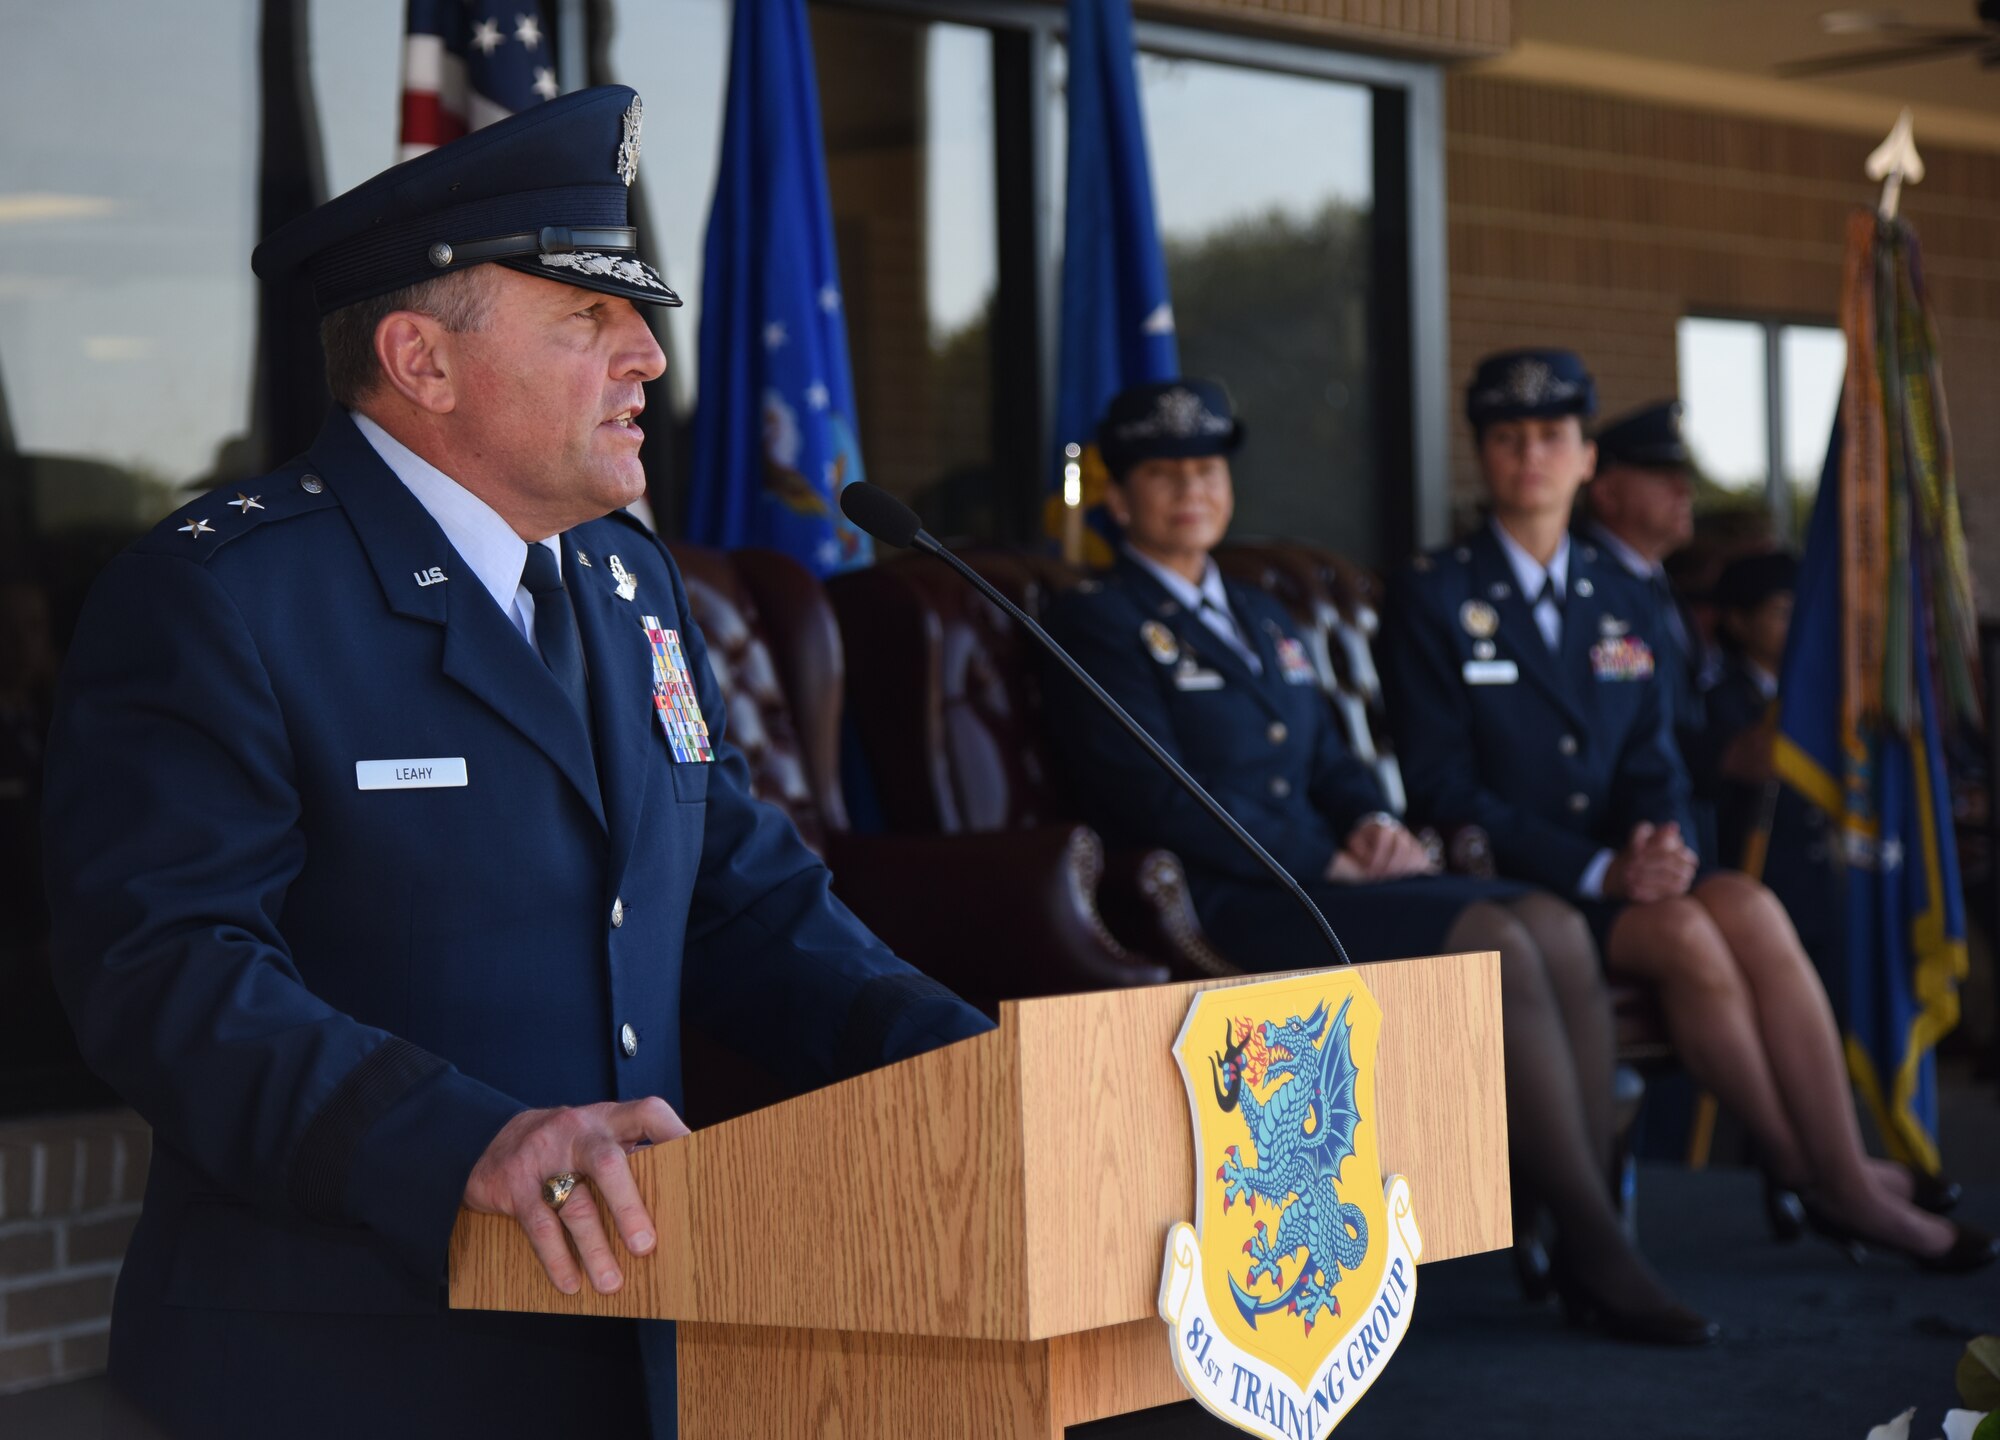 U.S. Air Force Maj. Gen. Timothy Leahy, Second Air Force commander, delivers remarks during the 81st Training Wing change of command ceremony on the Levitow Training Support Facility drill pad at Keesler Air Force Base, Mississippi, May 16, 2019. Col. Debra Lovette, relinquished command of the 81st TRW to Col. Heather Blackwell. (U.S. Air Force photo by Kemberly Groue)